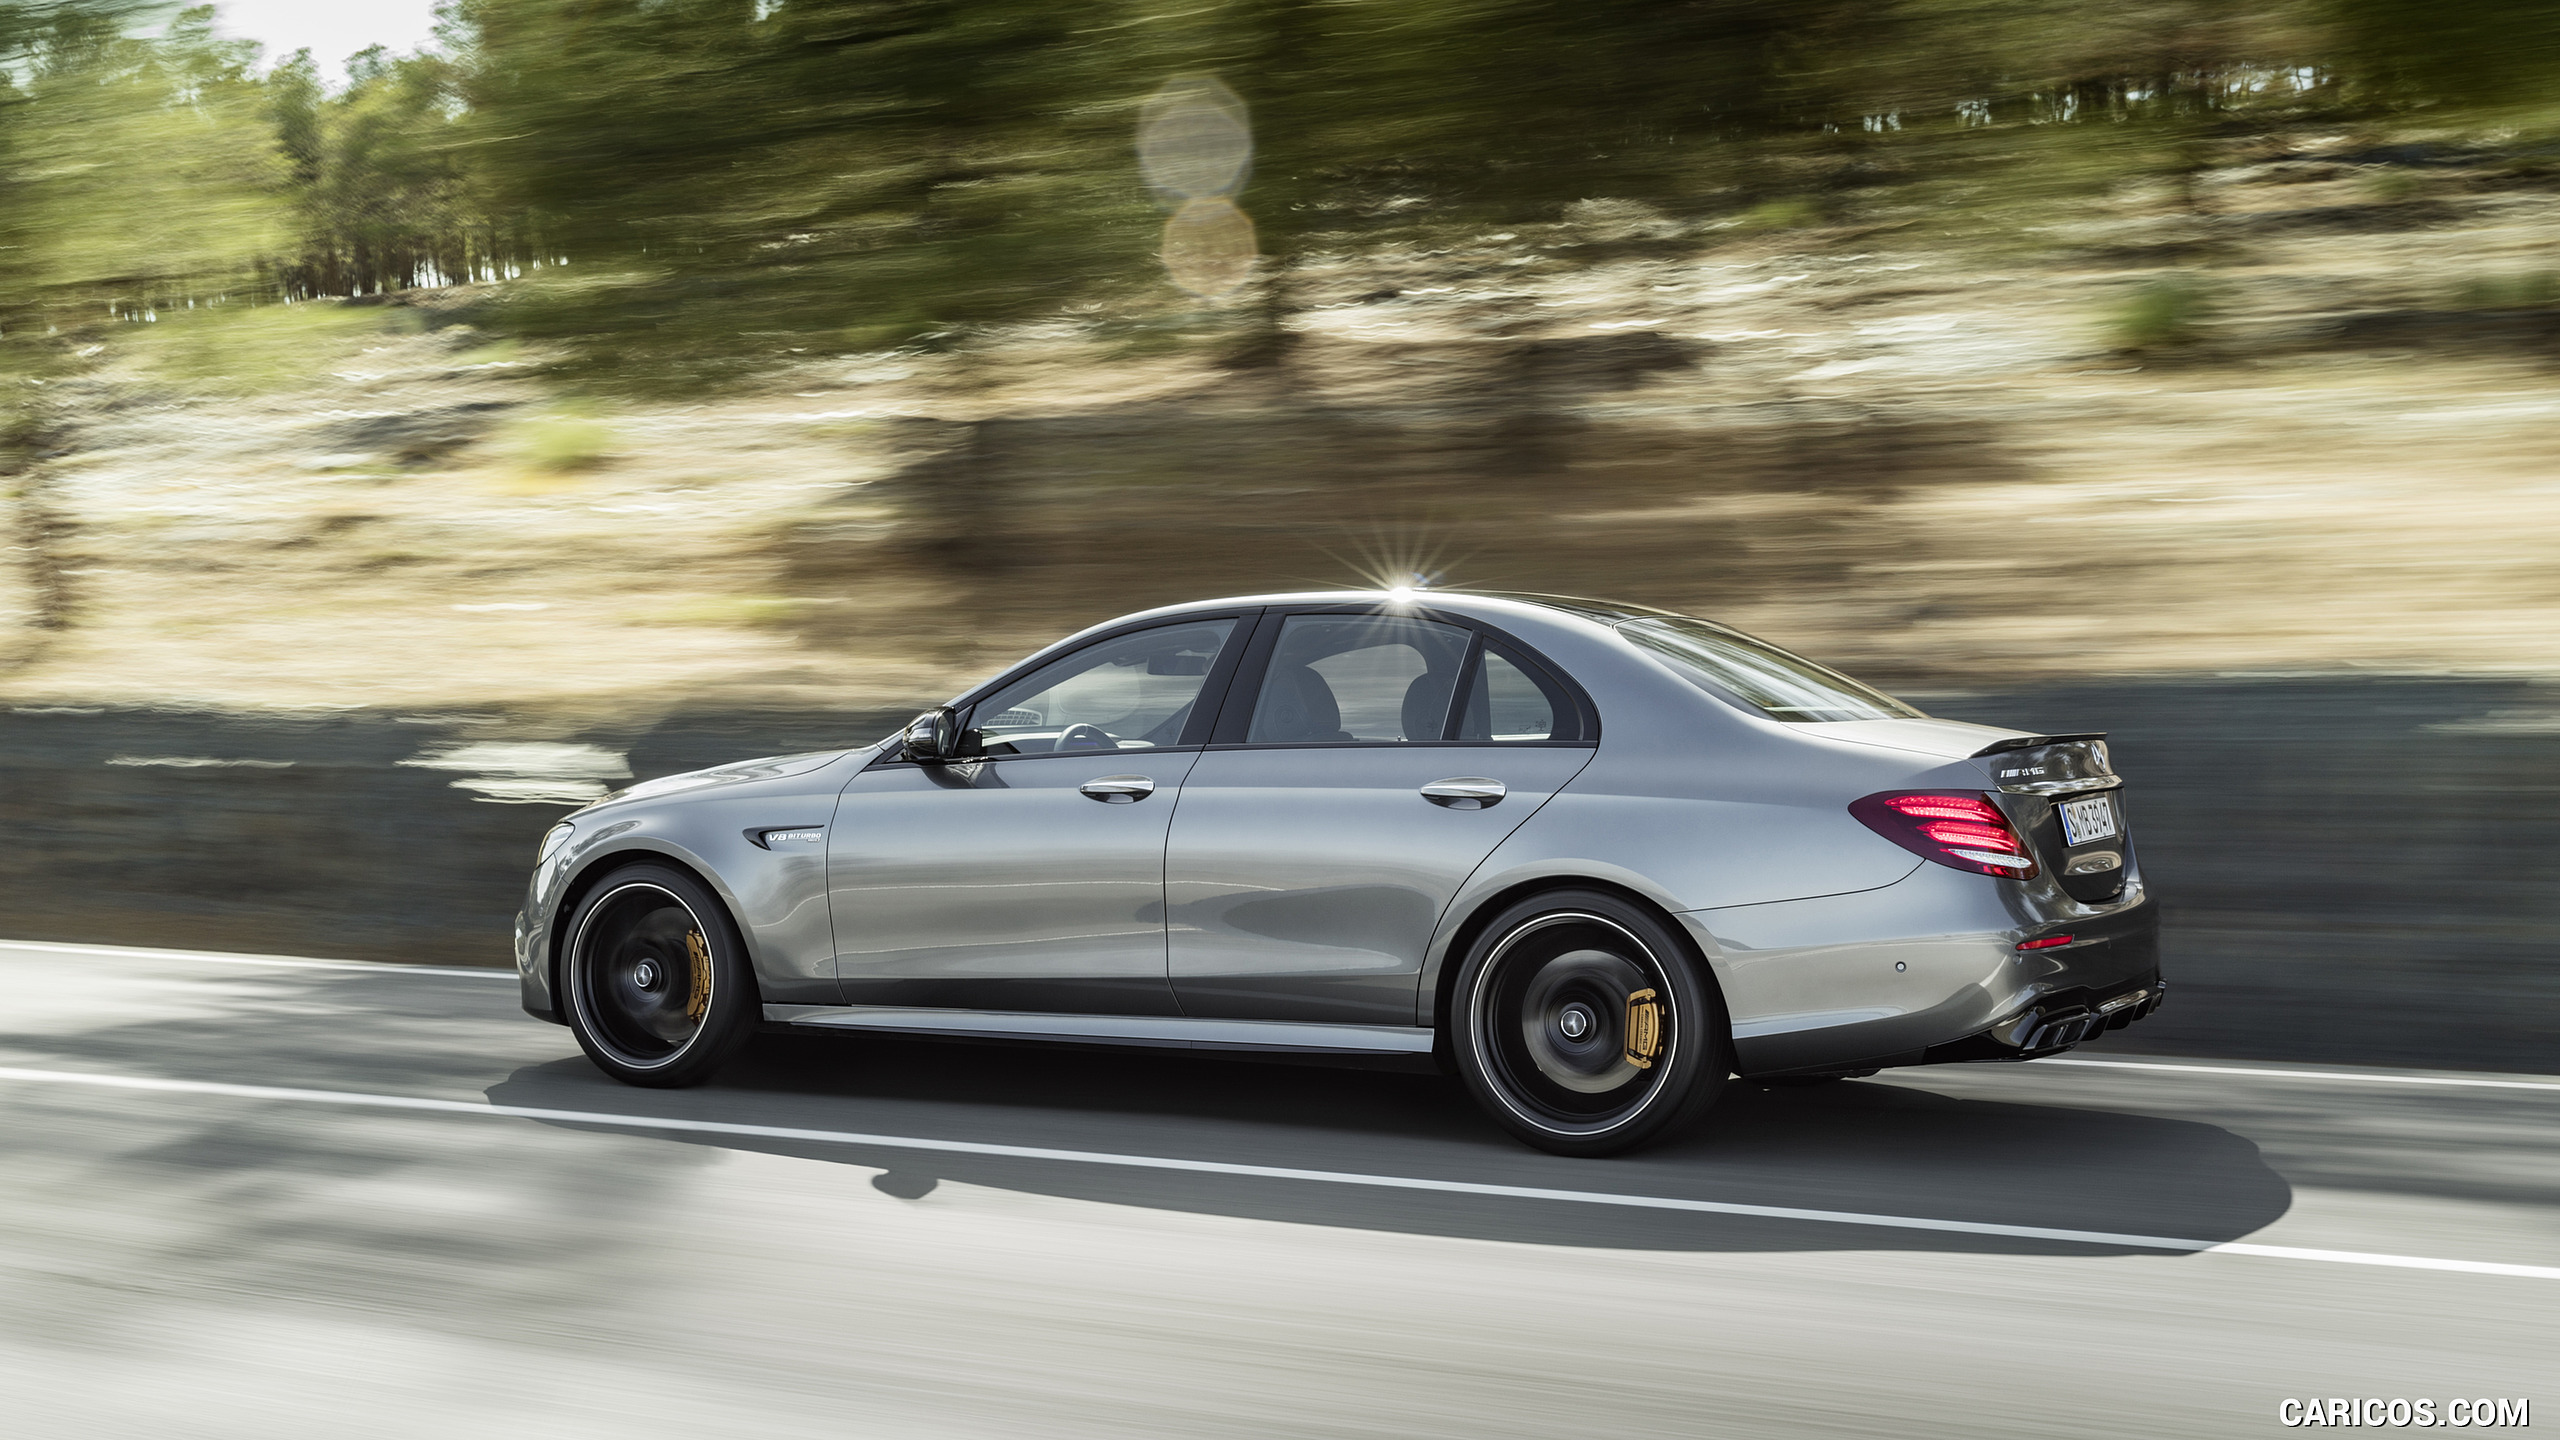 2018 Mercedes-AMG E63 S 4MATIC+ - Side, #6 of 323